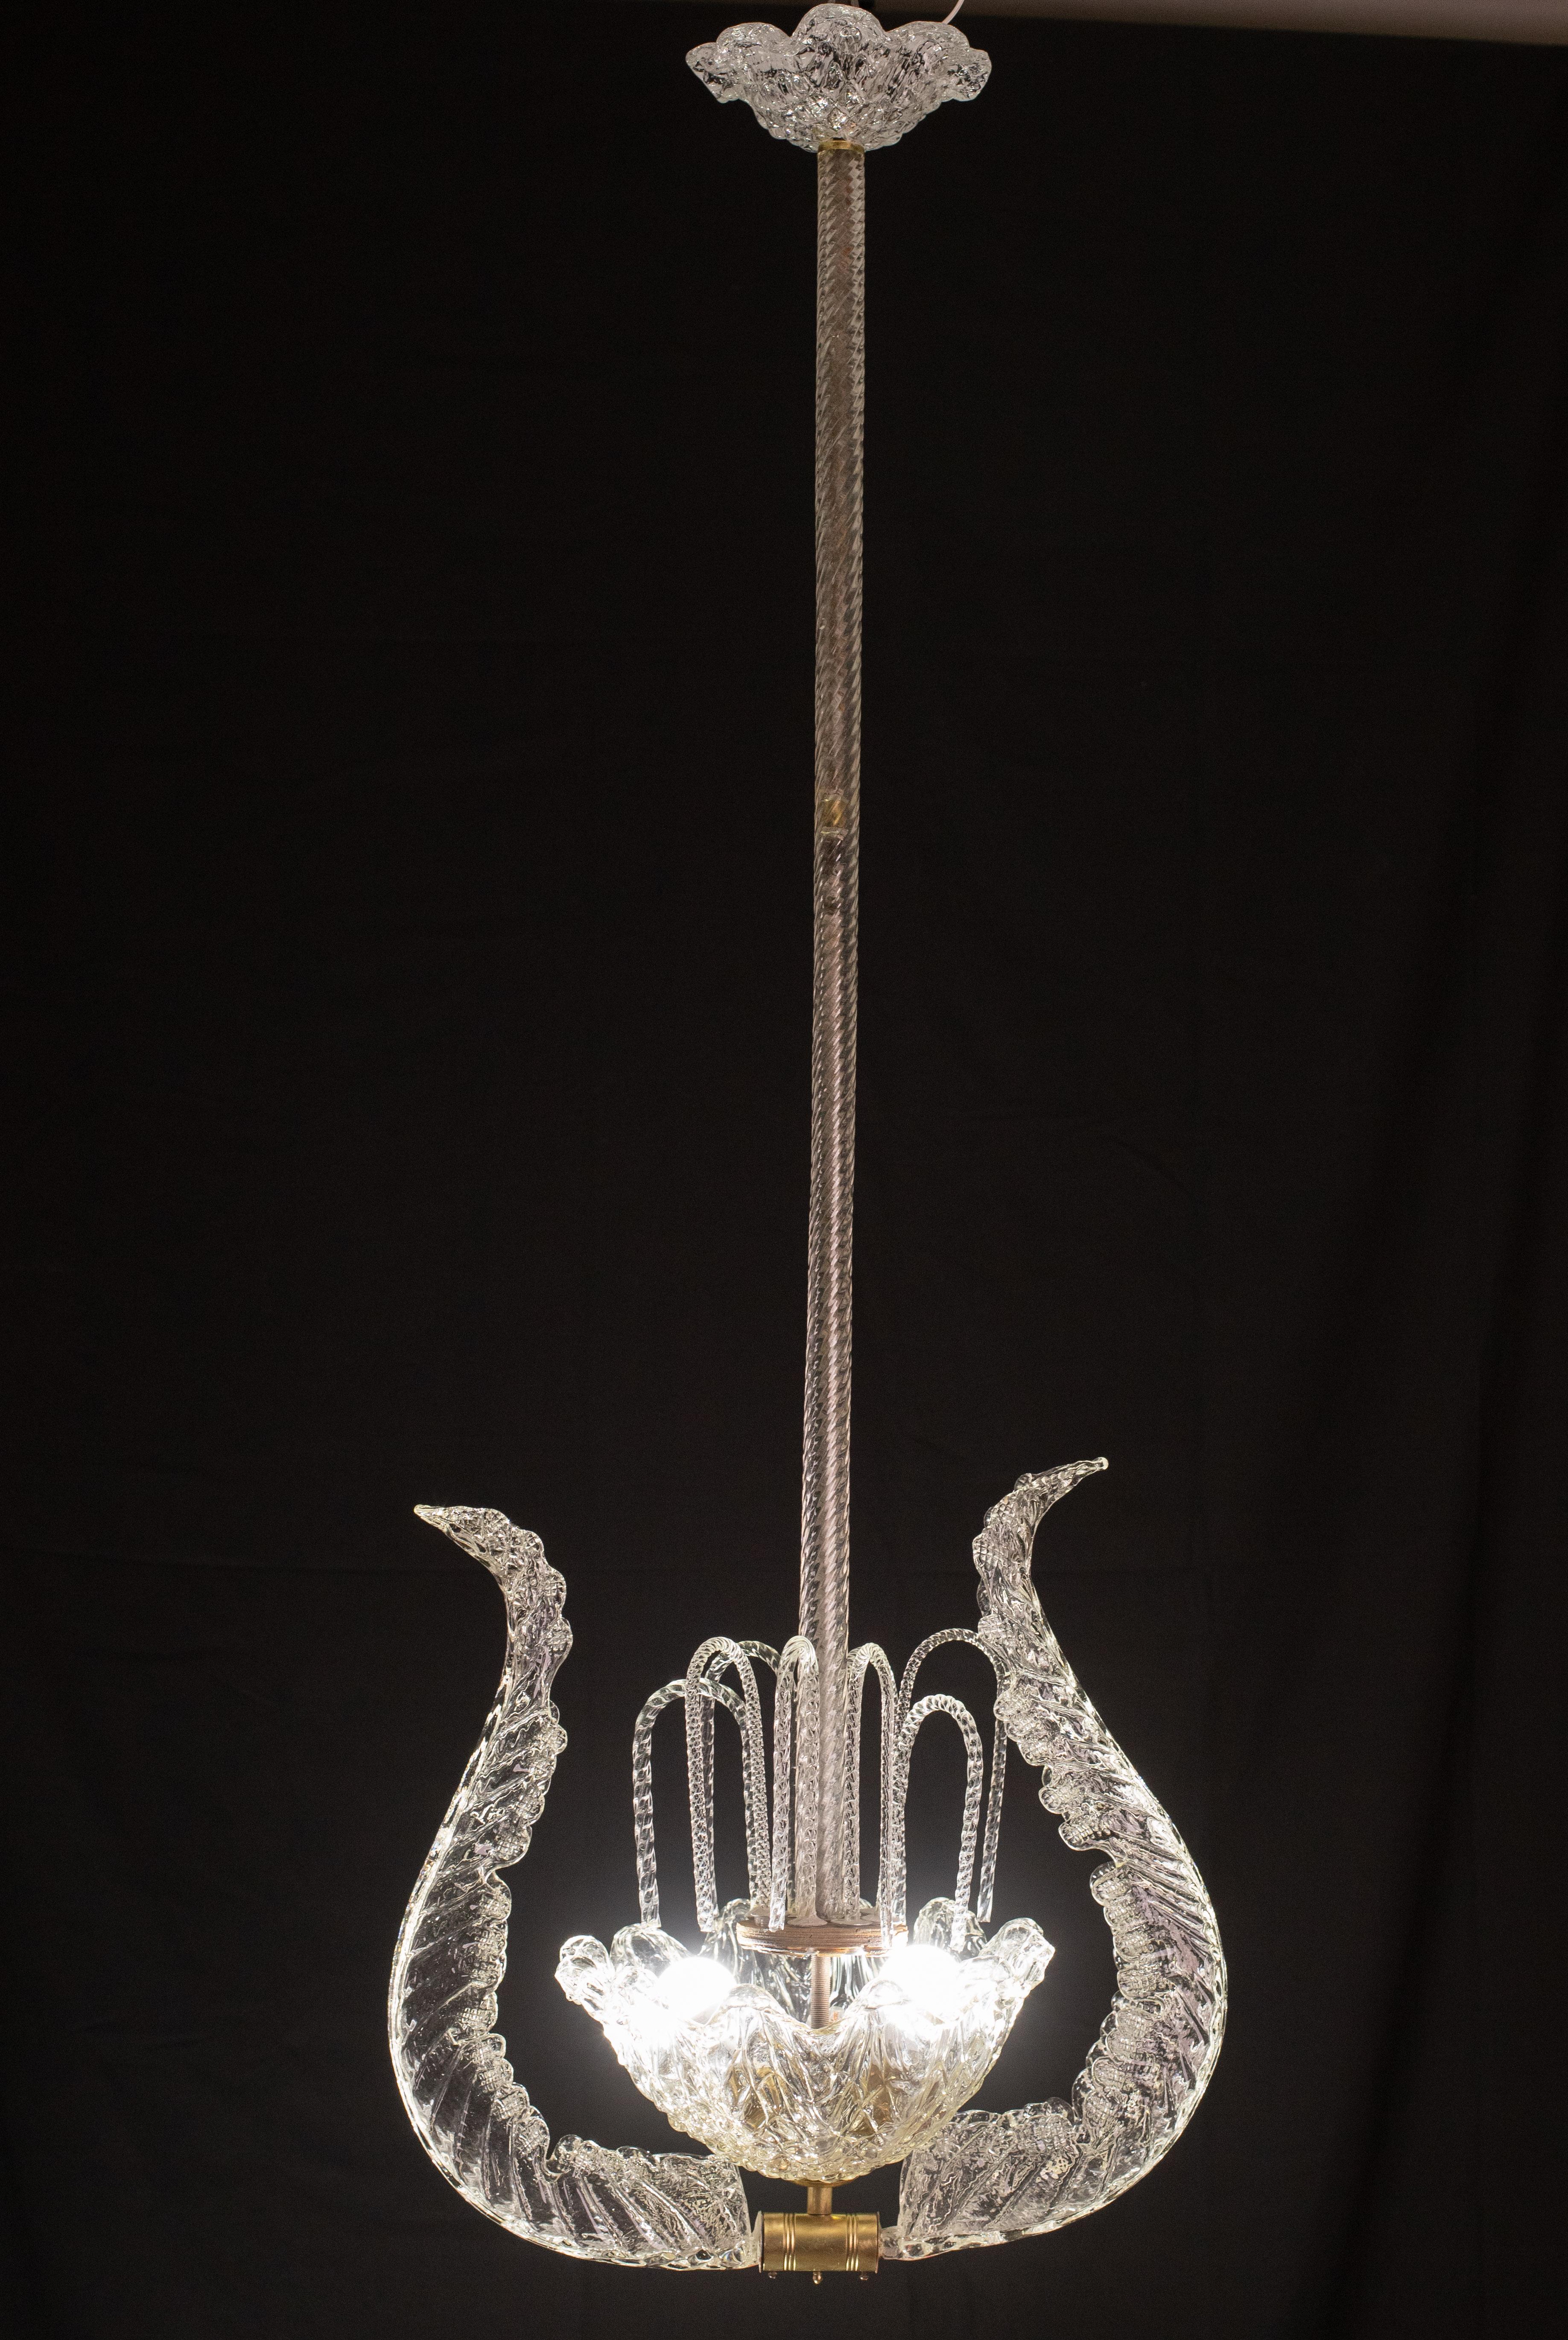 Elegant chandelier attributed to the Barovier e Toso glassworks.

Design period: 1930\1950.

The chandelier consists of a long central element, a glass bowl decorated with two leaves and filled with glass descending.

The glass panes are in perfect